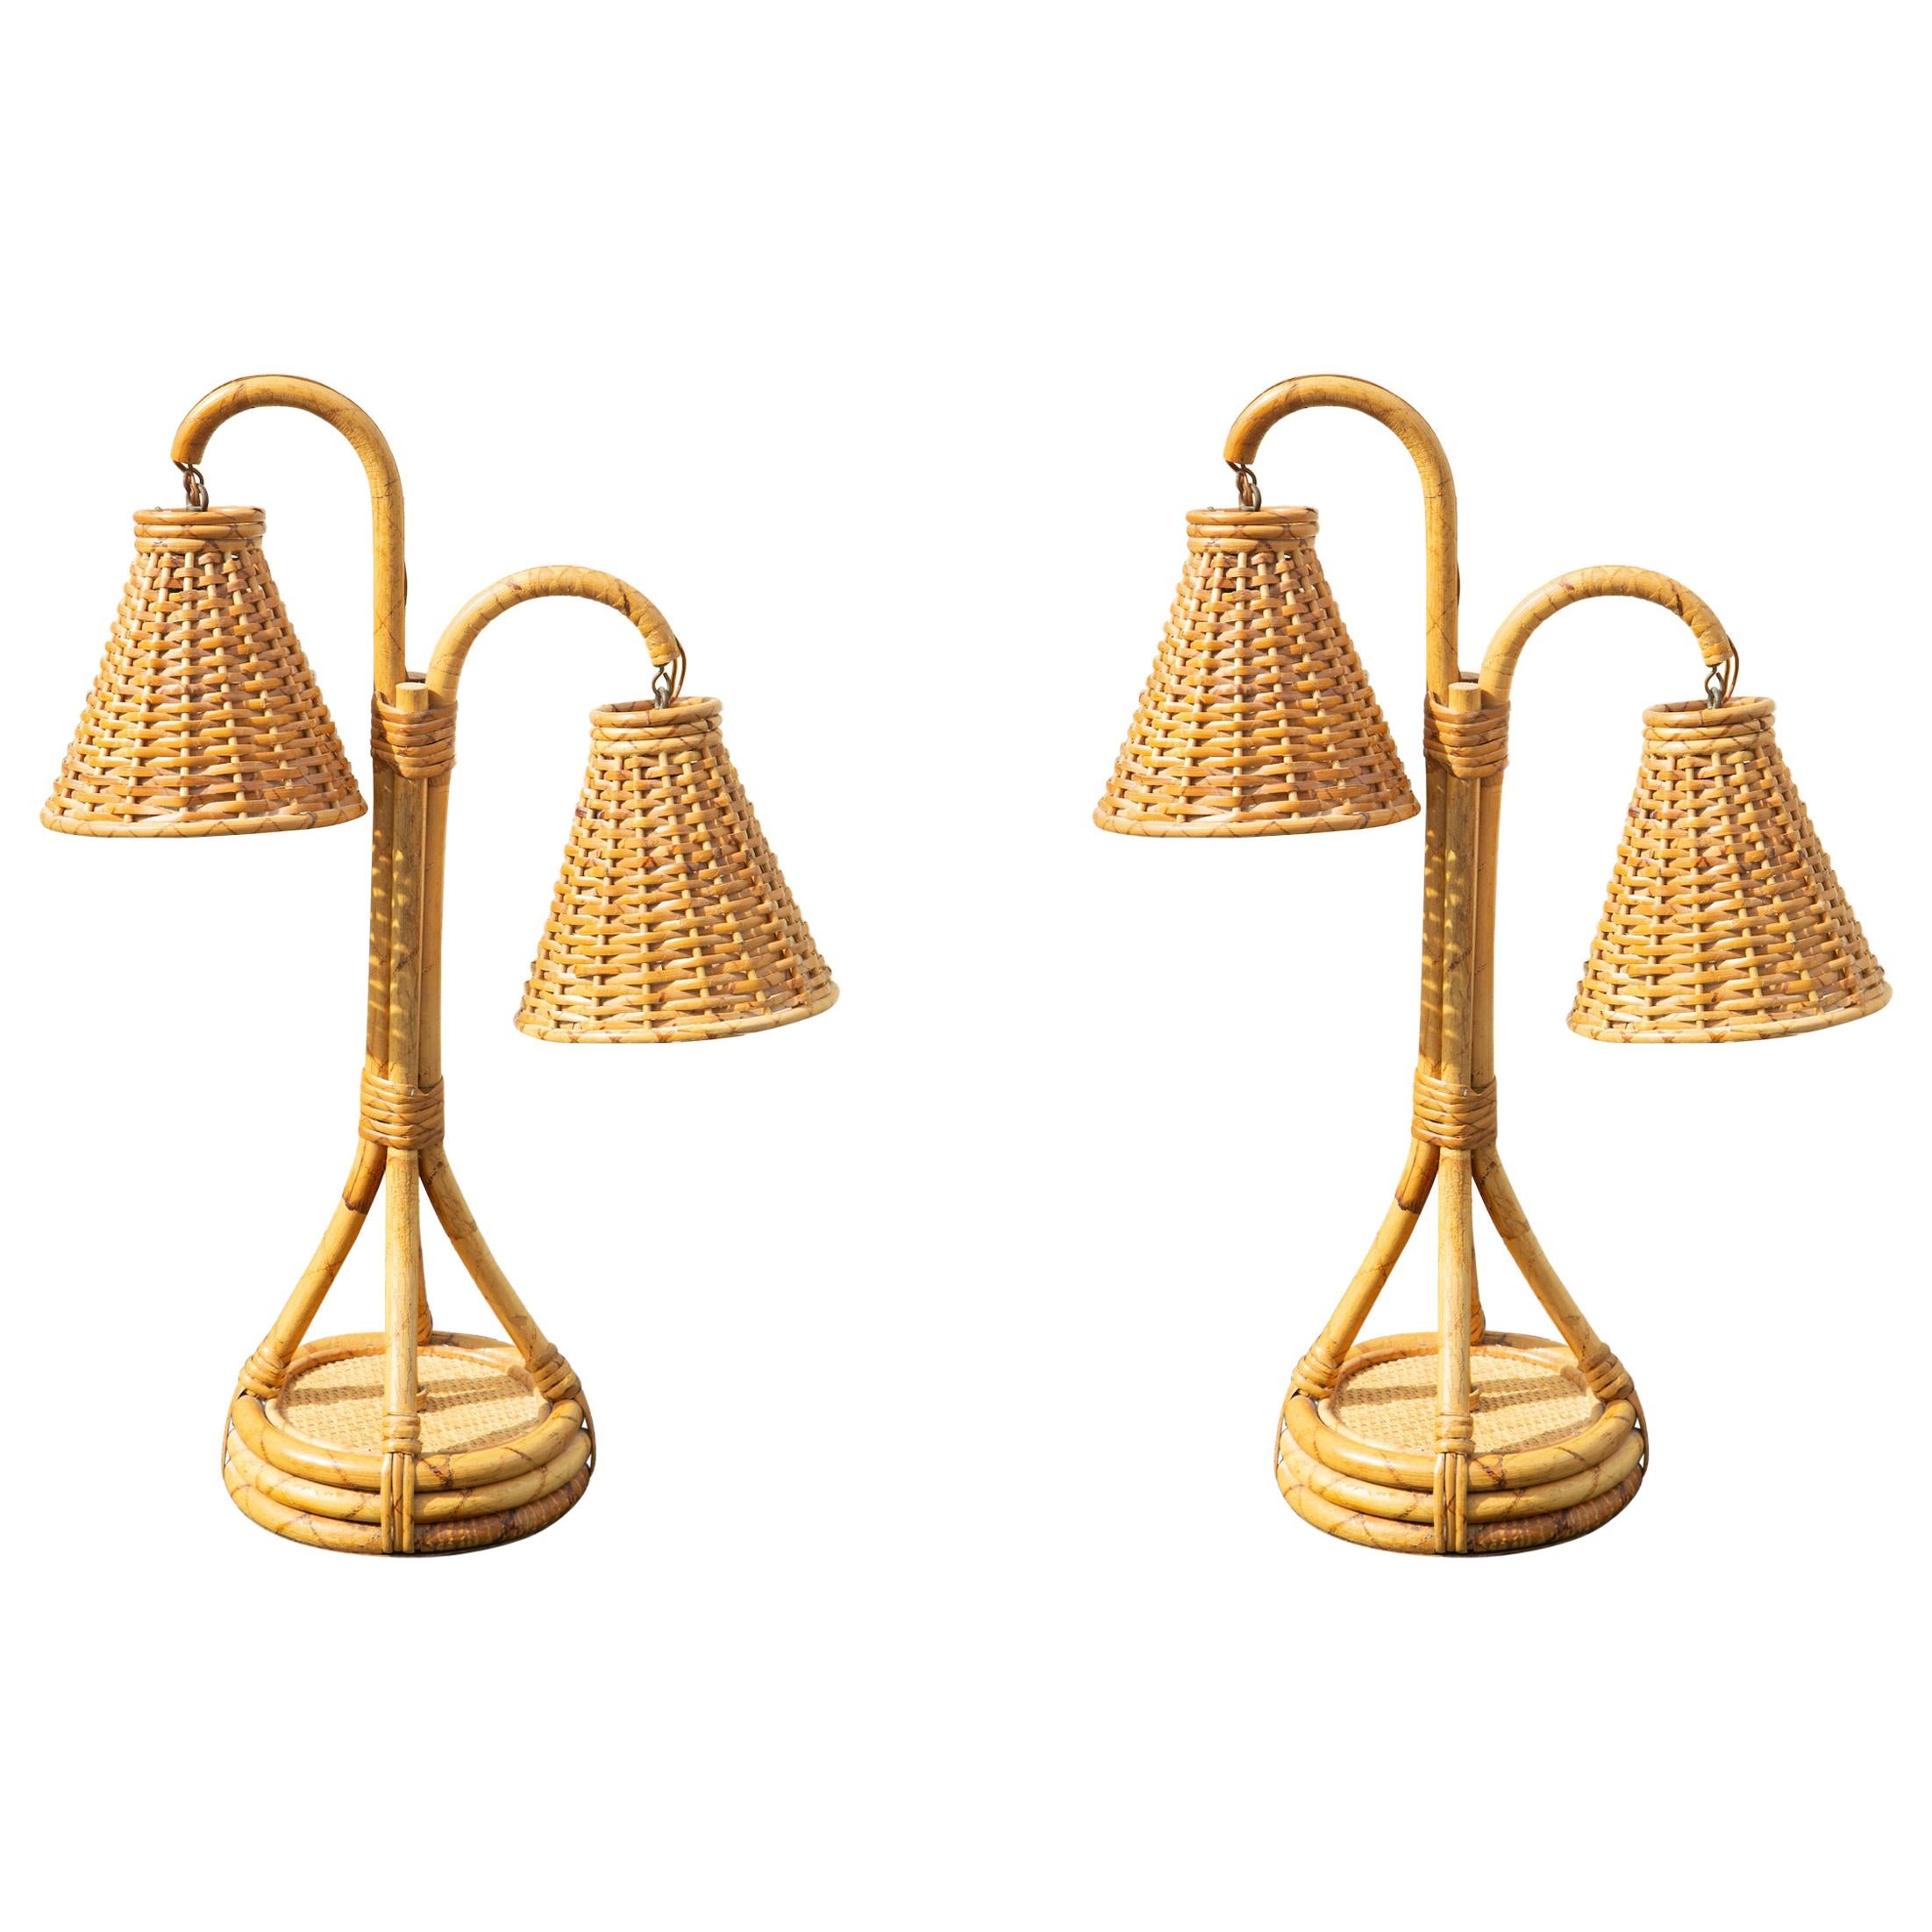 Rare Vintage Pair of Bamboo and Rattan Table Lamp